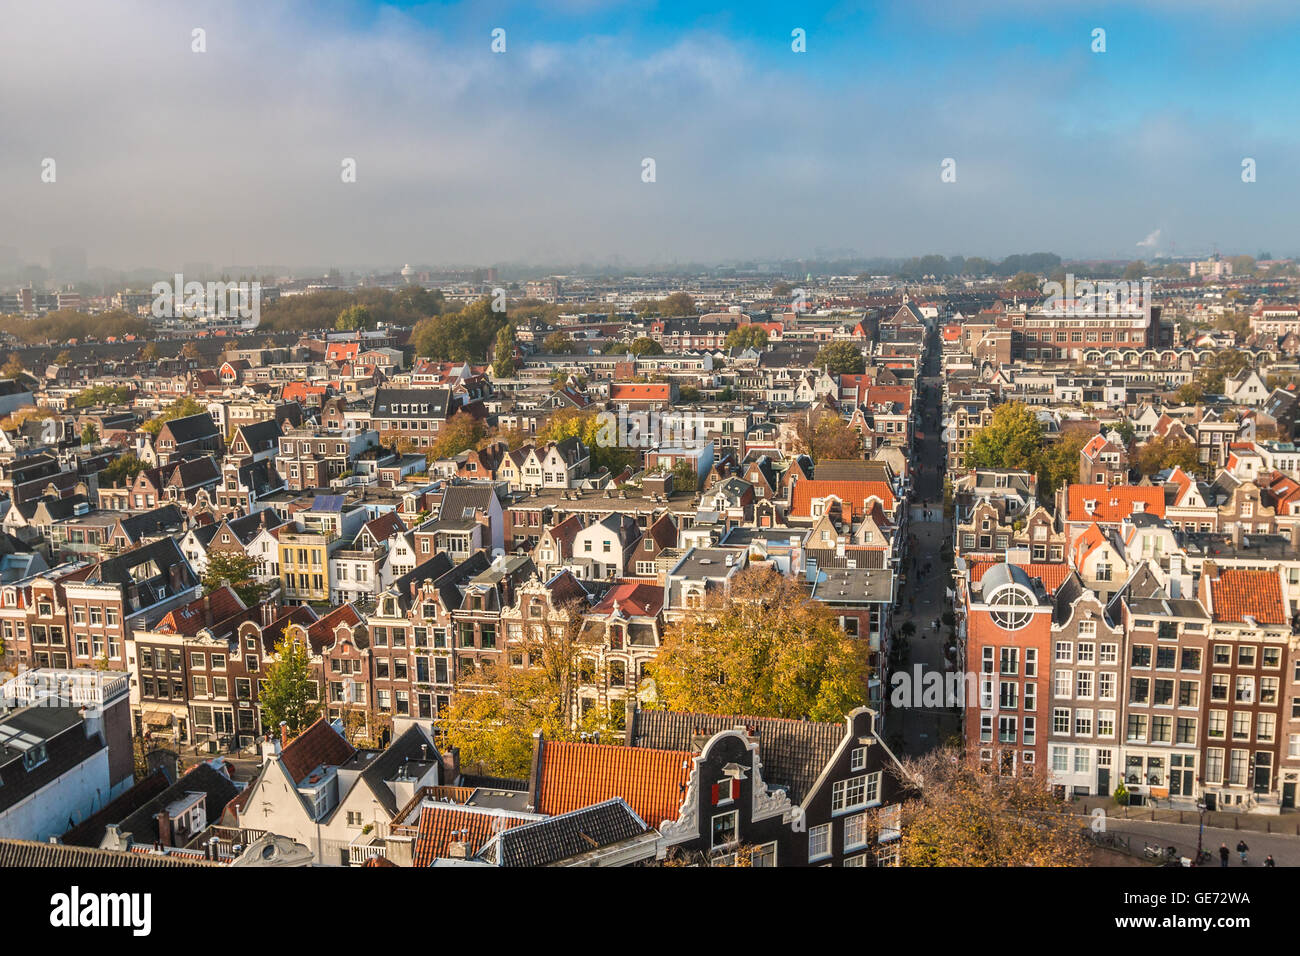 View of Delft Netherlands Stock Photo